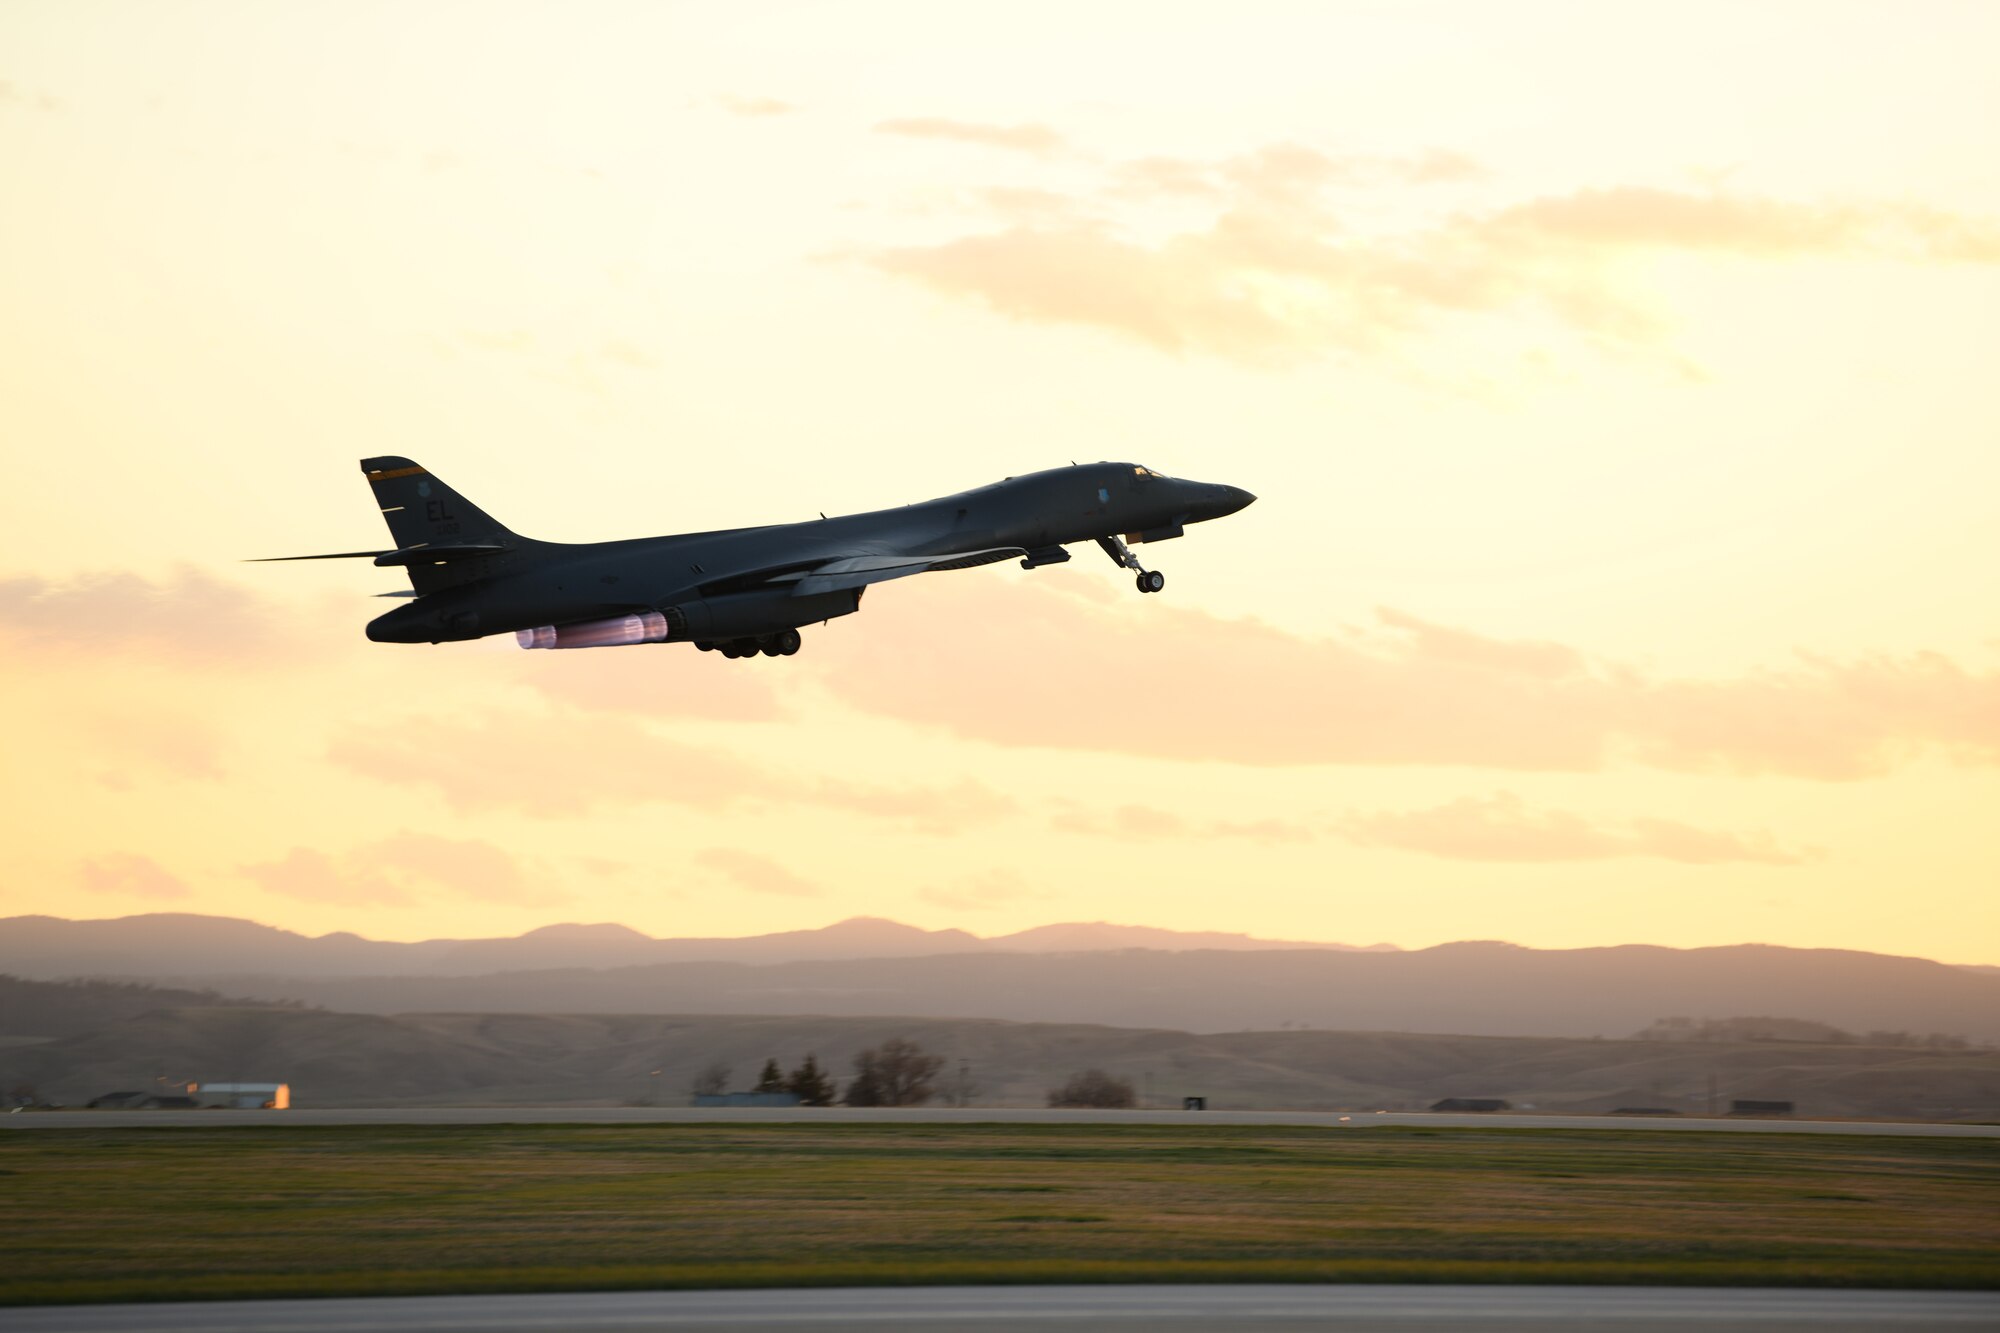 A B-1B Lancer assigned to the 28th Bomb Wing launches from Ellsworth Air Force Base, S.D., April 28, 2020, to support a Bomber Task Force mission in the Indo-Pacific region. This operation demonstrates the U.S. Air Force’s dynamic force employment model in line with the National Defense Strategy’s objectives of strategic predictability and operational unpredictability. (U.S. Air Force photo by Senior Airman Nicolas Erwin)